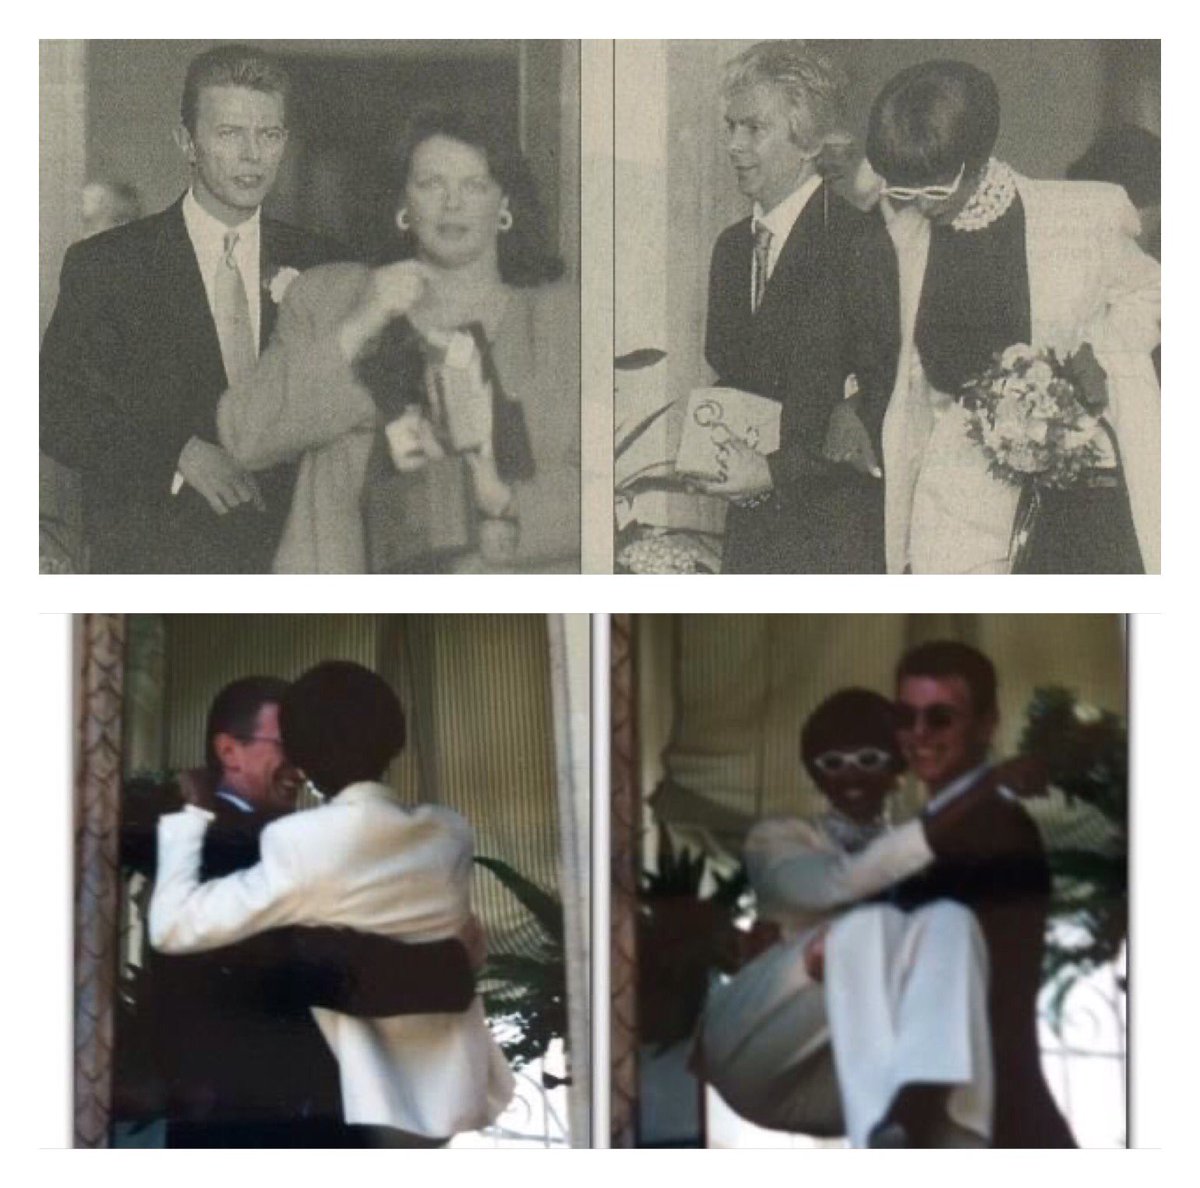 On this day, 32 years ago, David Bowie and Iman had their private civil wedding ceremony, which took place at Lausanne registry office, Switzerland in 1992